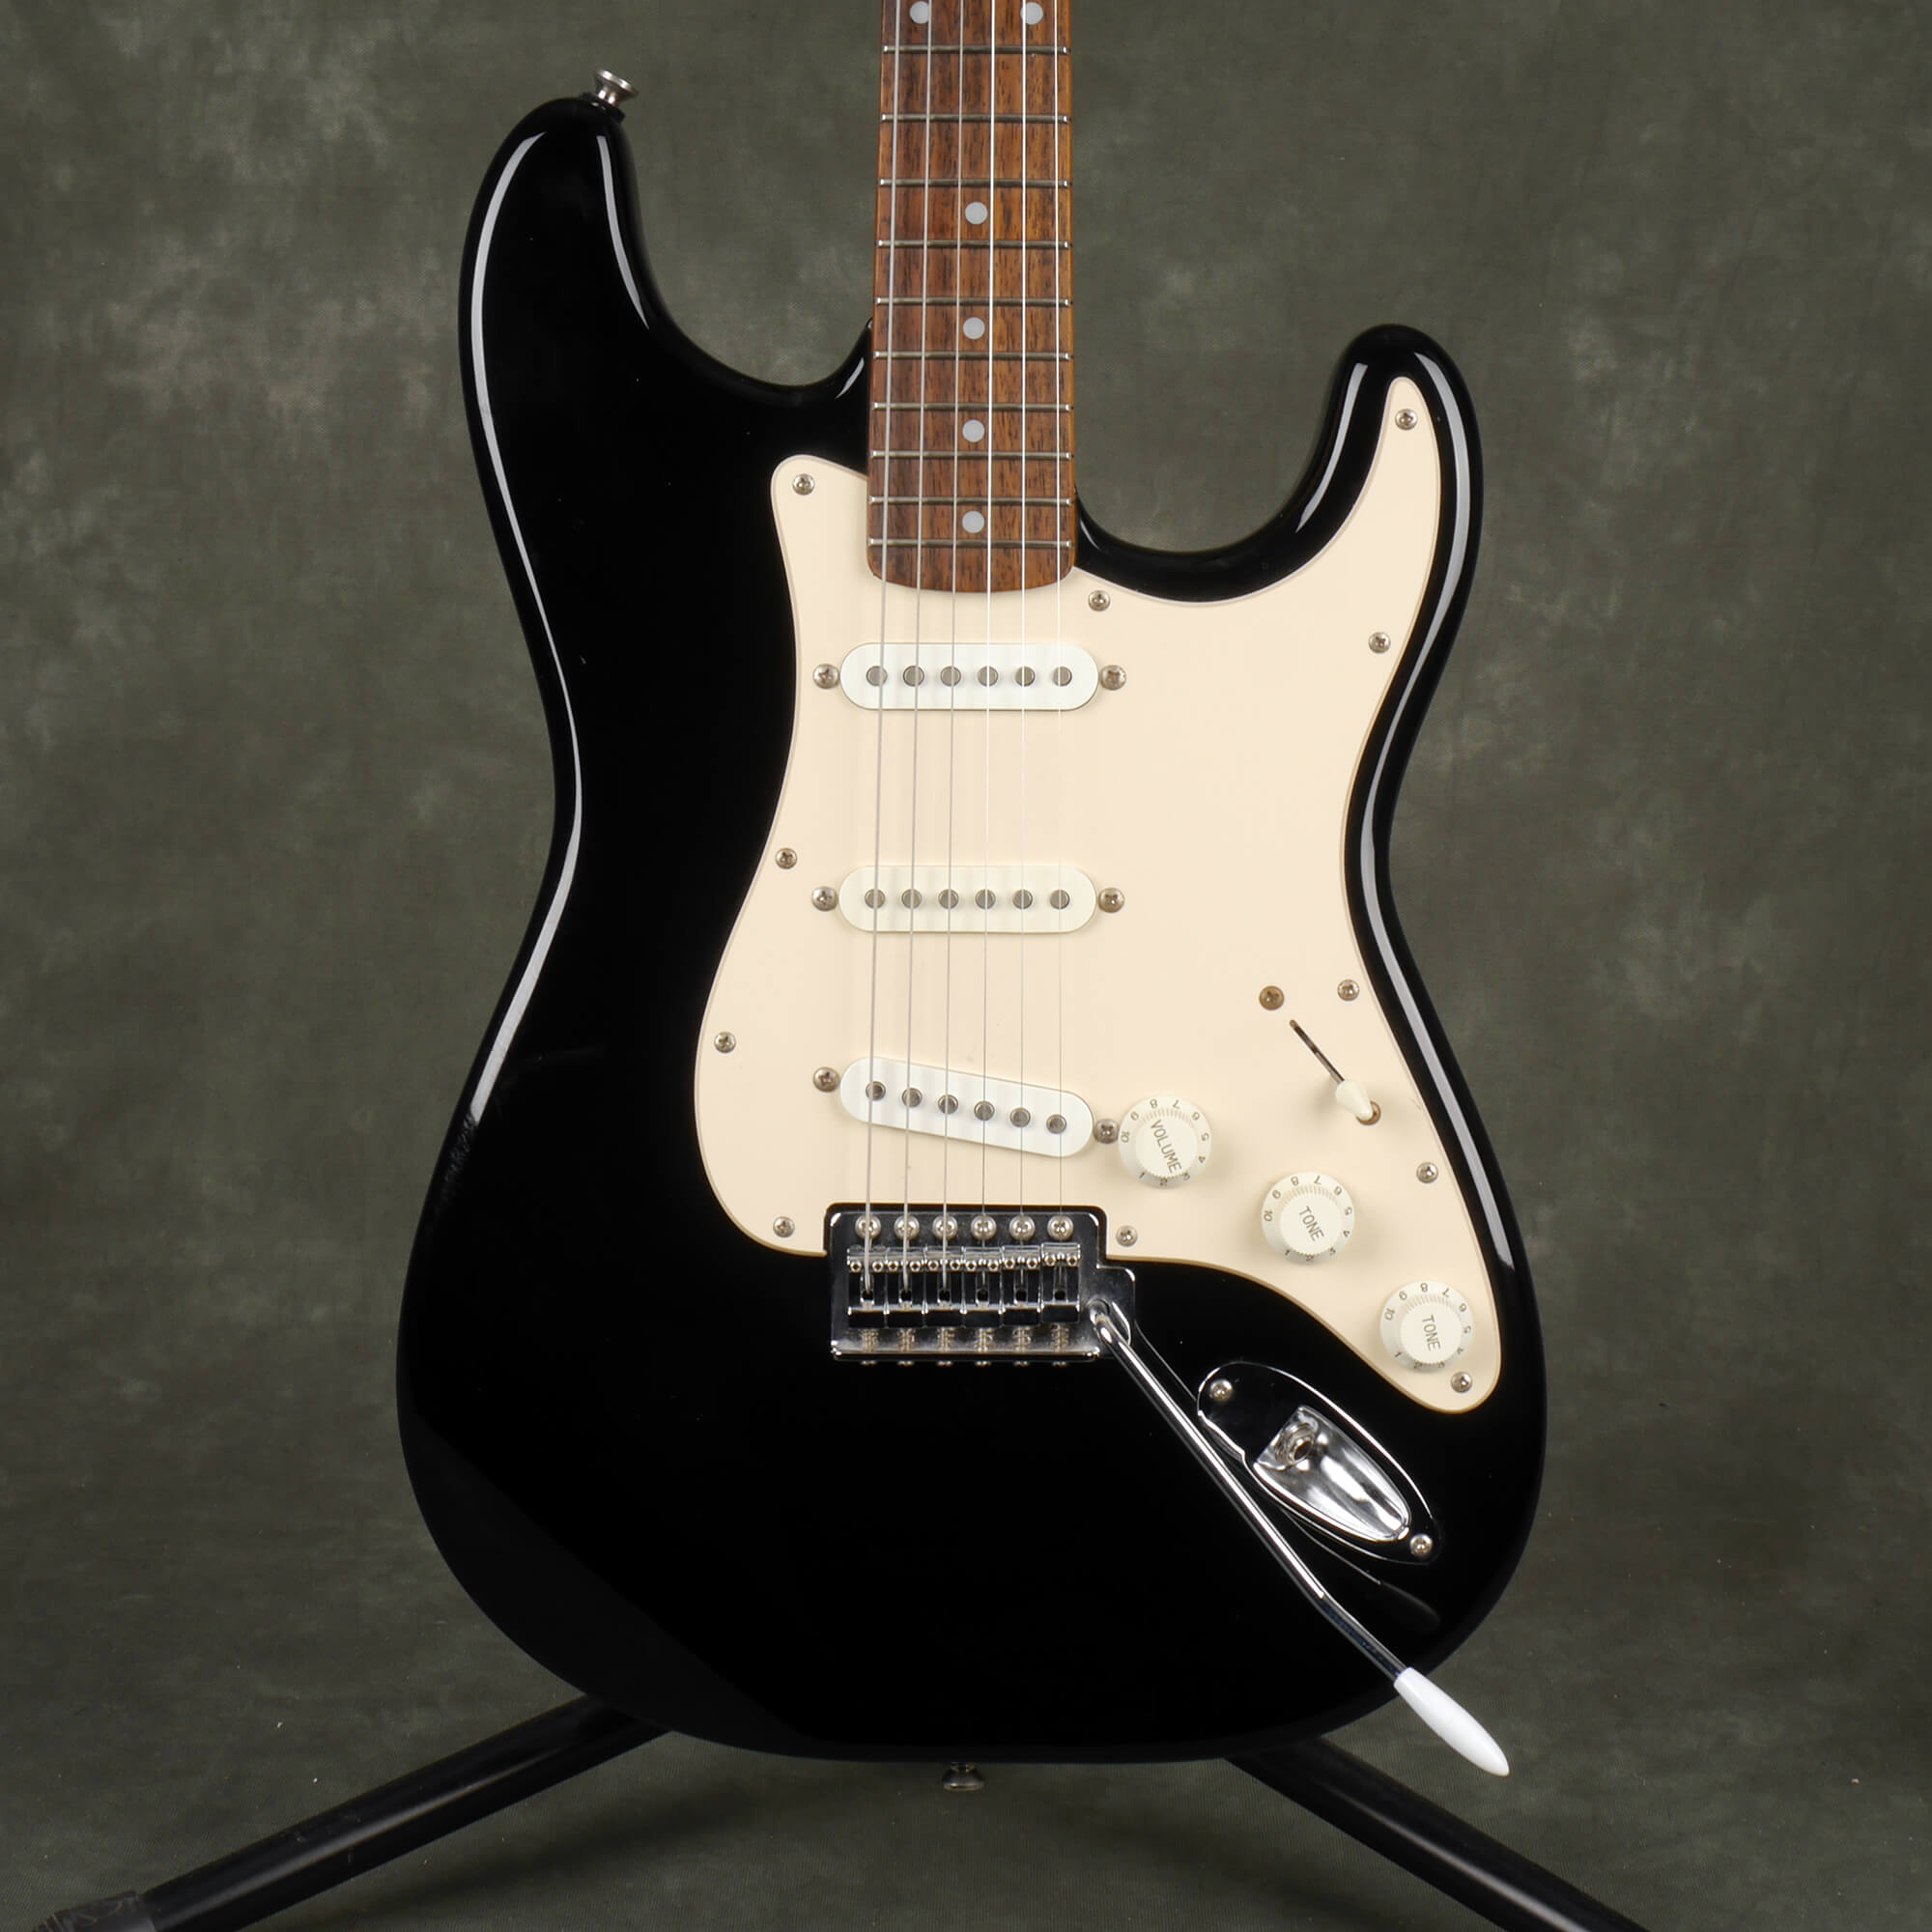 Squier affinity stratocaster. Squier Affinity Stratocaster Black. Ямаха электрогитара 60 годов.